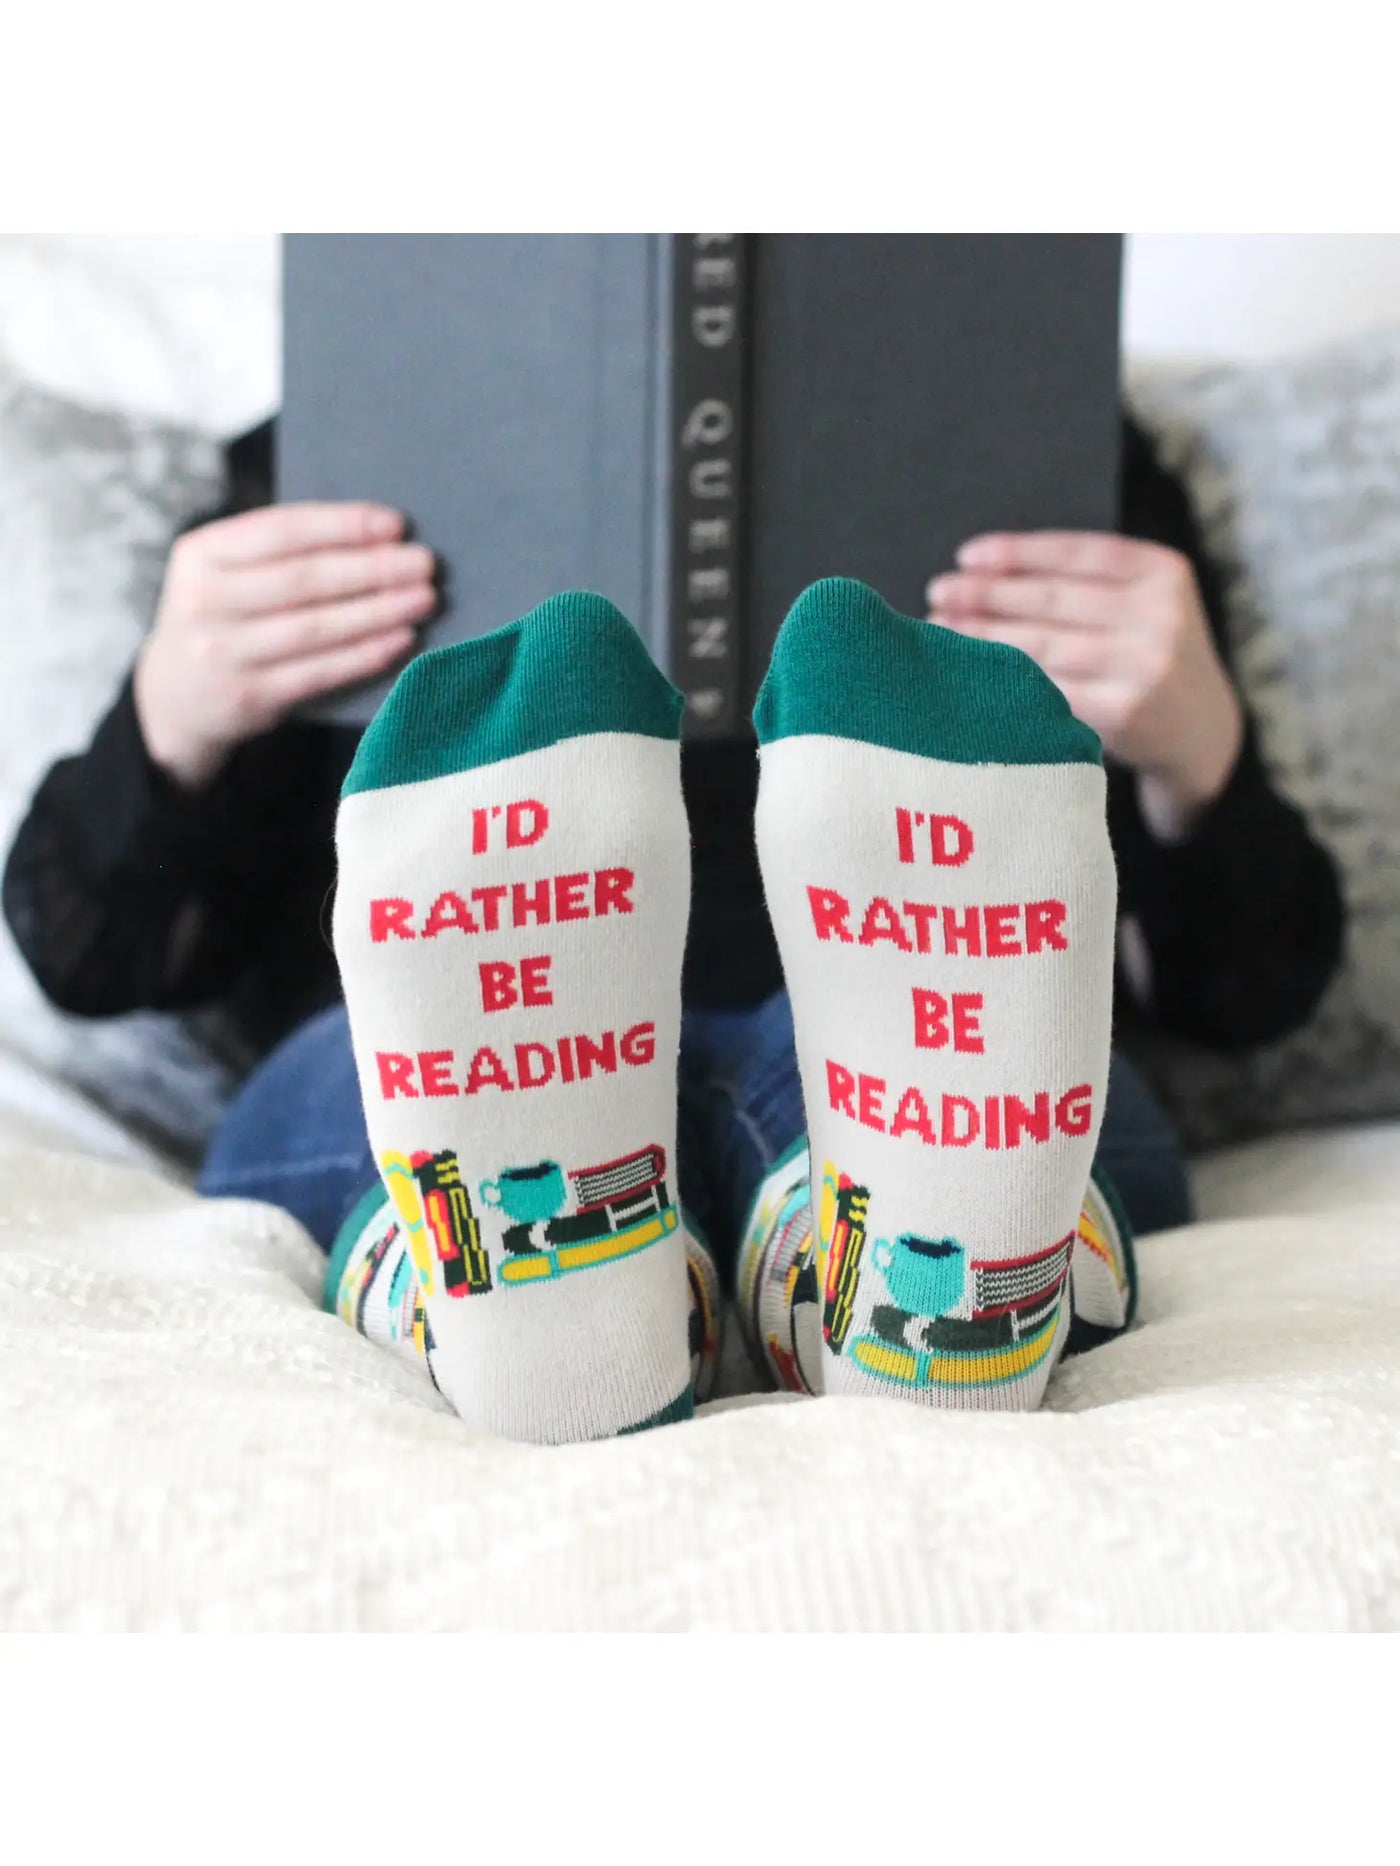 I'd rather be reading socks bookworm reader book lover cozy winter fall gift stocking stuffer holiday Modern smart causal female chic effortless outfit womens ladies gift elegant effortless clothing everyday stylish clothes apparel outfits chic winter fall autumn professional style women’s boutique trendy teacher office cute outfit boutique clothes fashion quality work from home neutral wardrobe essential basics lounge athleisure gift for her midsize curvy sizes 